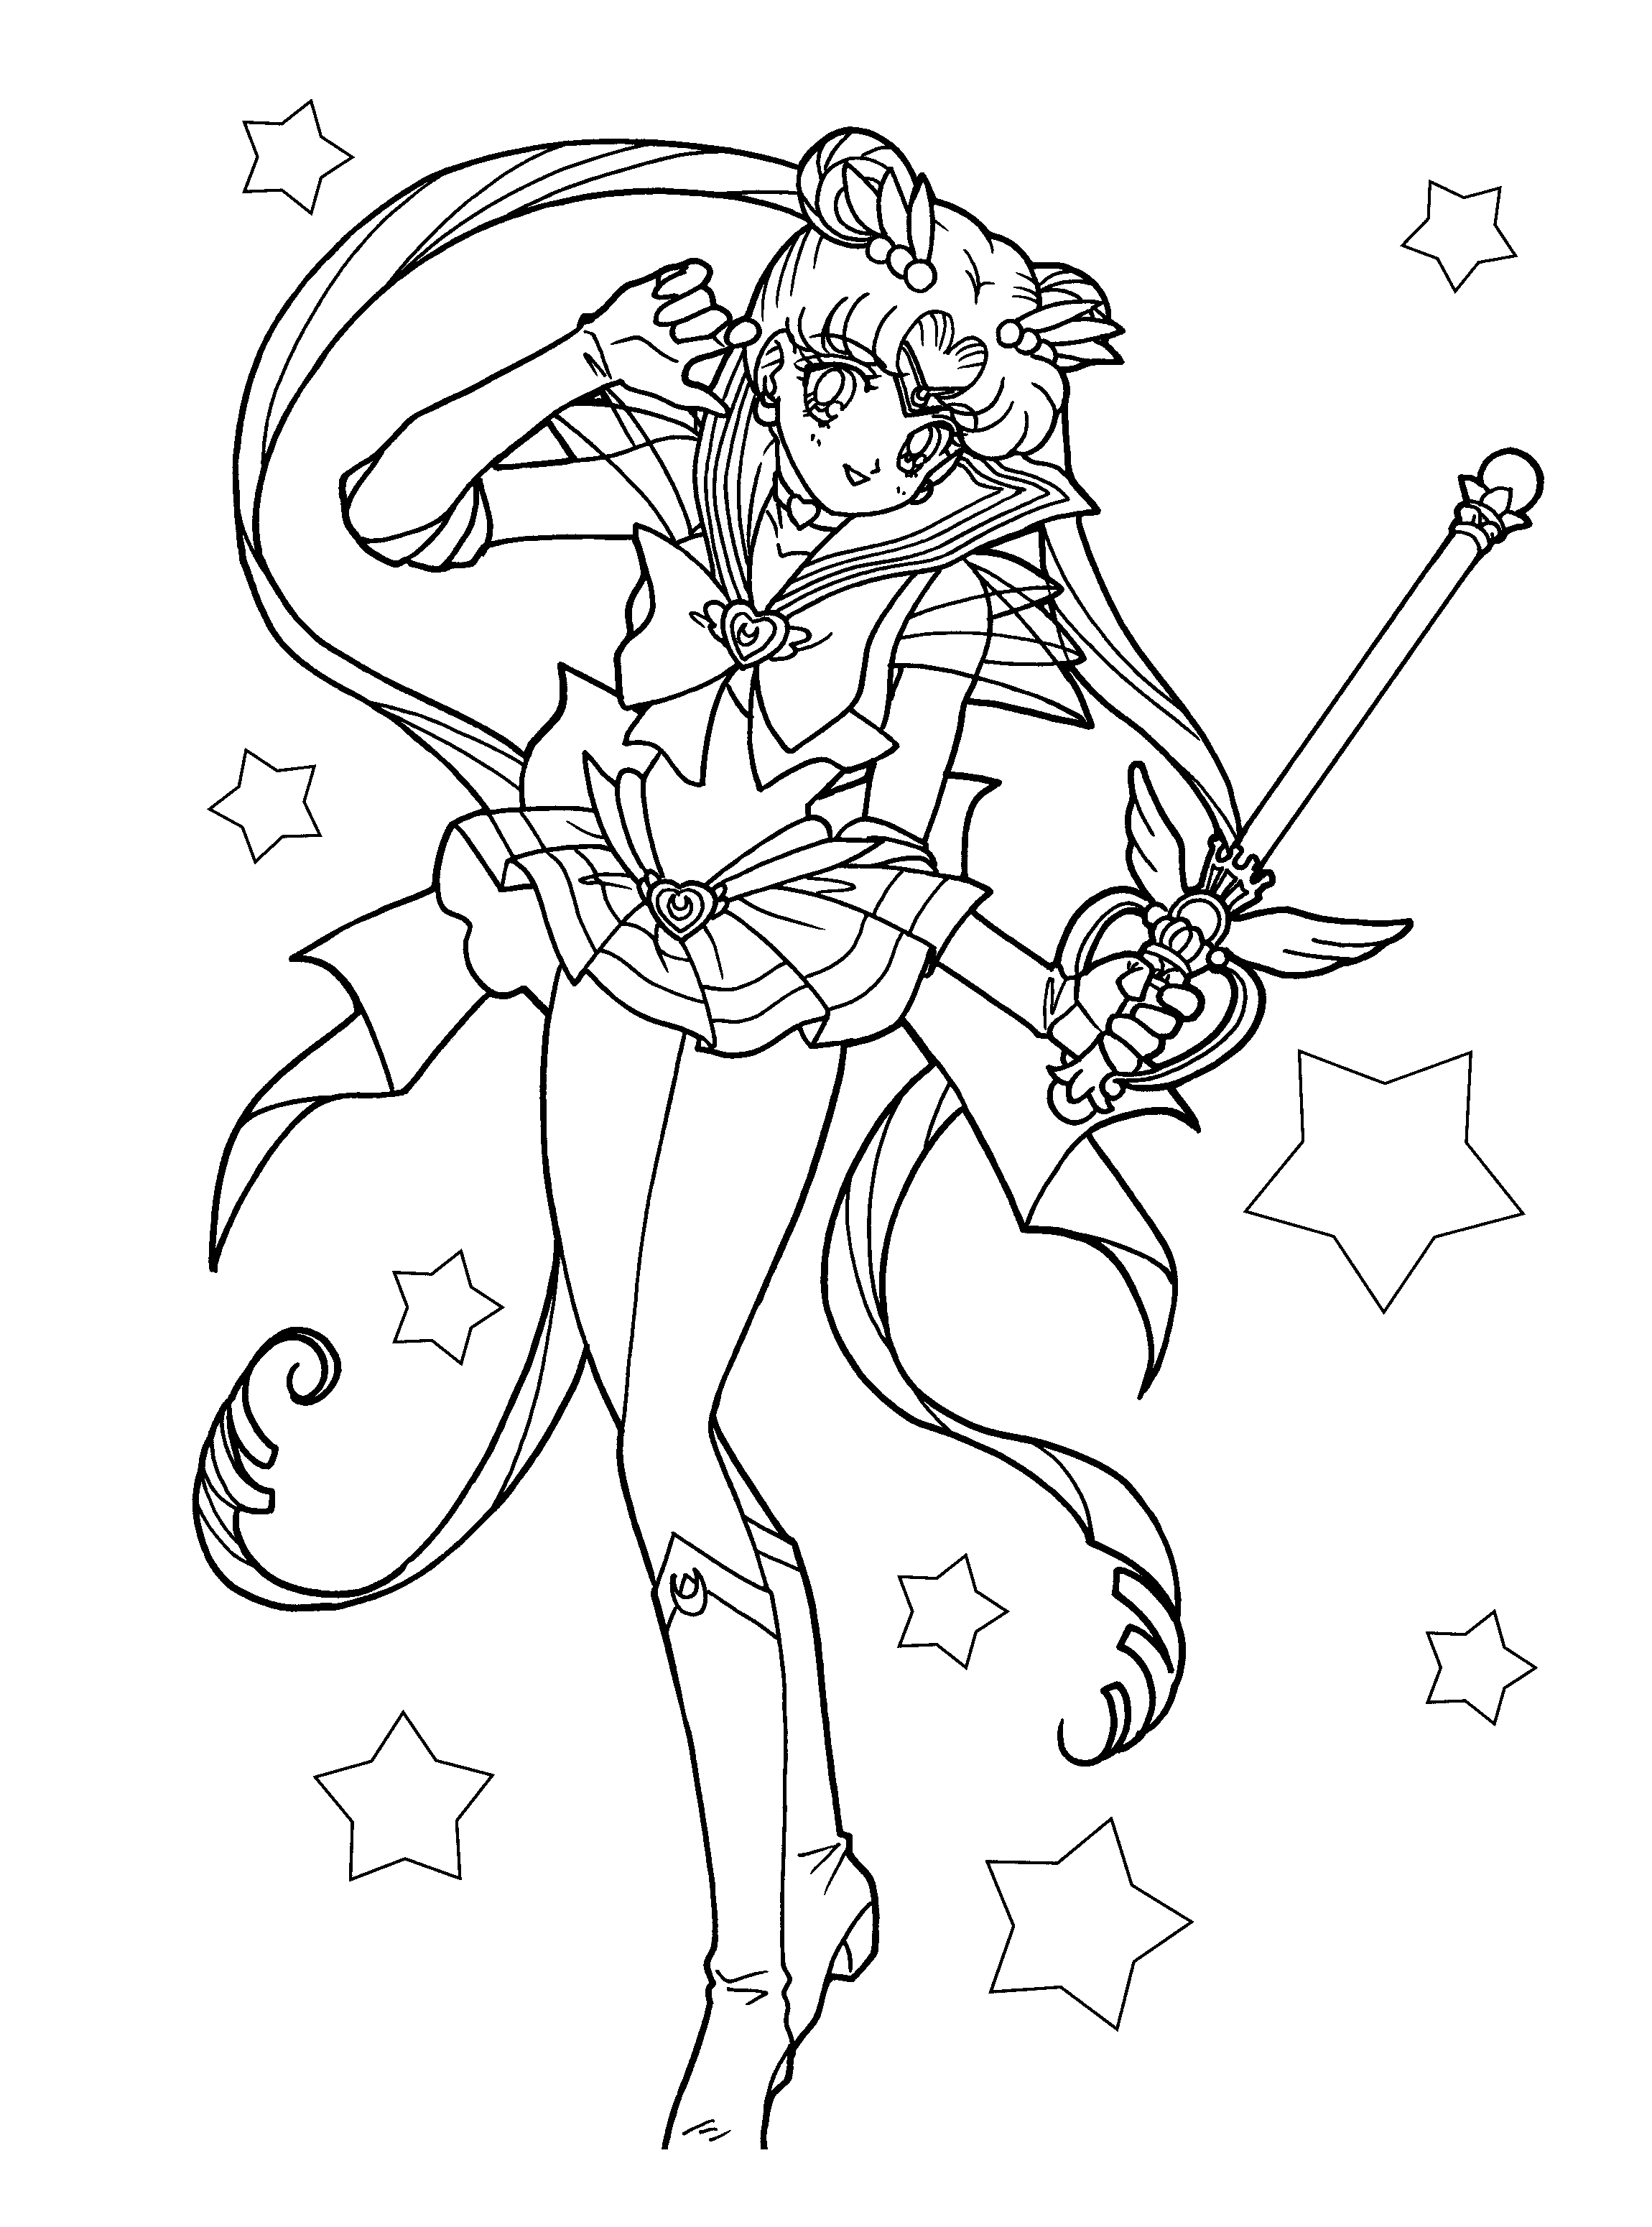 Sailormoon Coloring Pages   Coloringpages20.com   Coloring Home